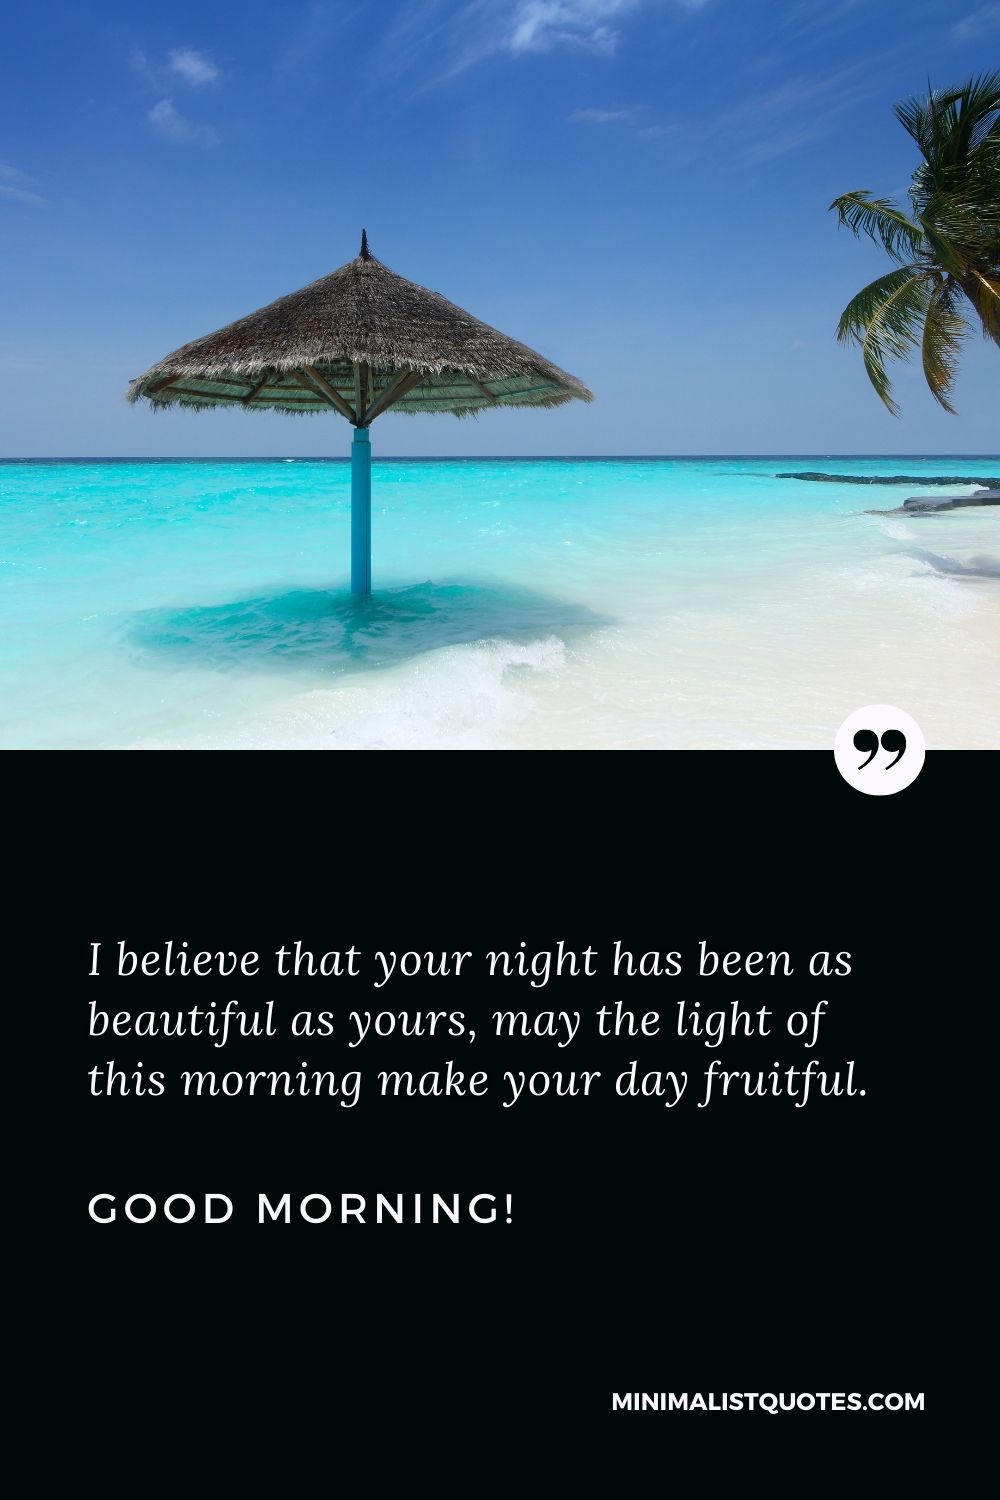 Good morning message for a female friend: I believe that your night has been as beautiful as yours, may the light of this morning make your day fruitful. Good Morning!